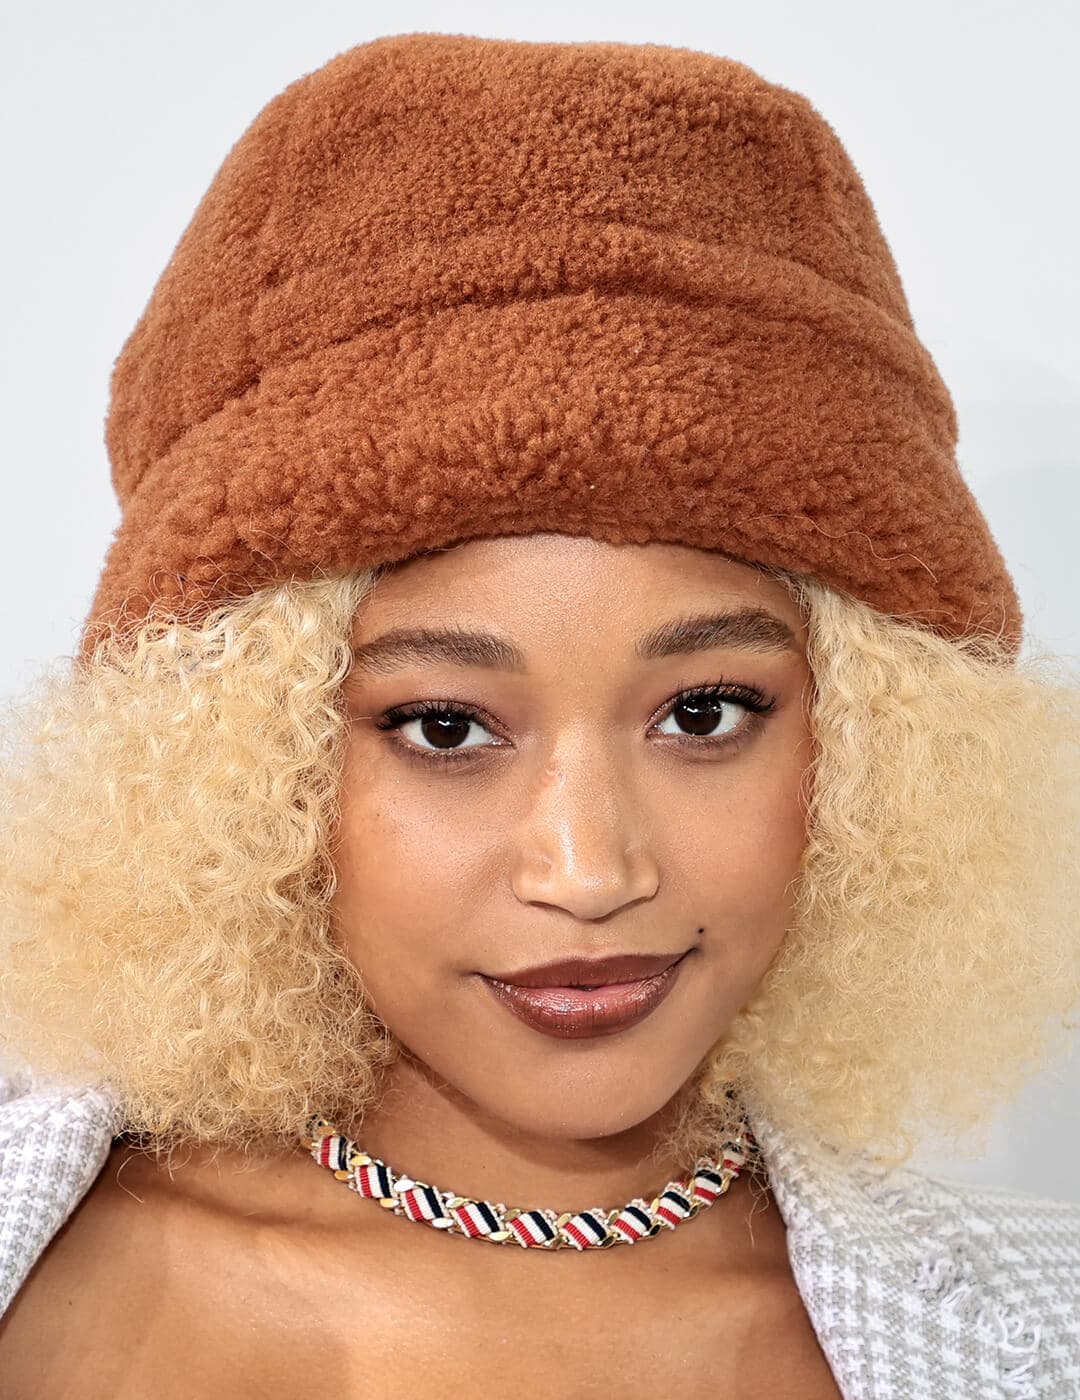 A photo of  Amandla Stenberg with a brown hat and brown curly hair